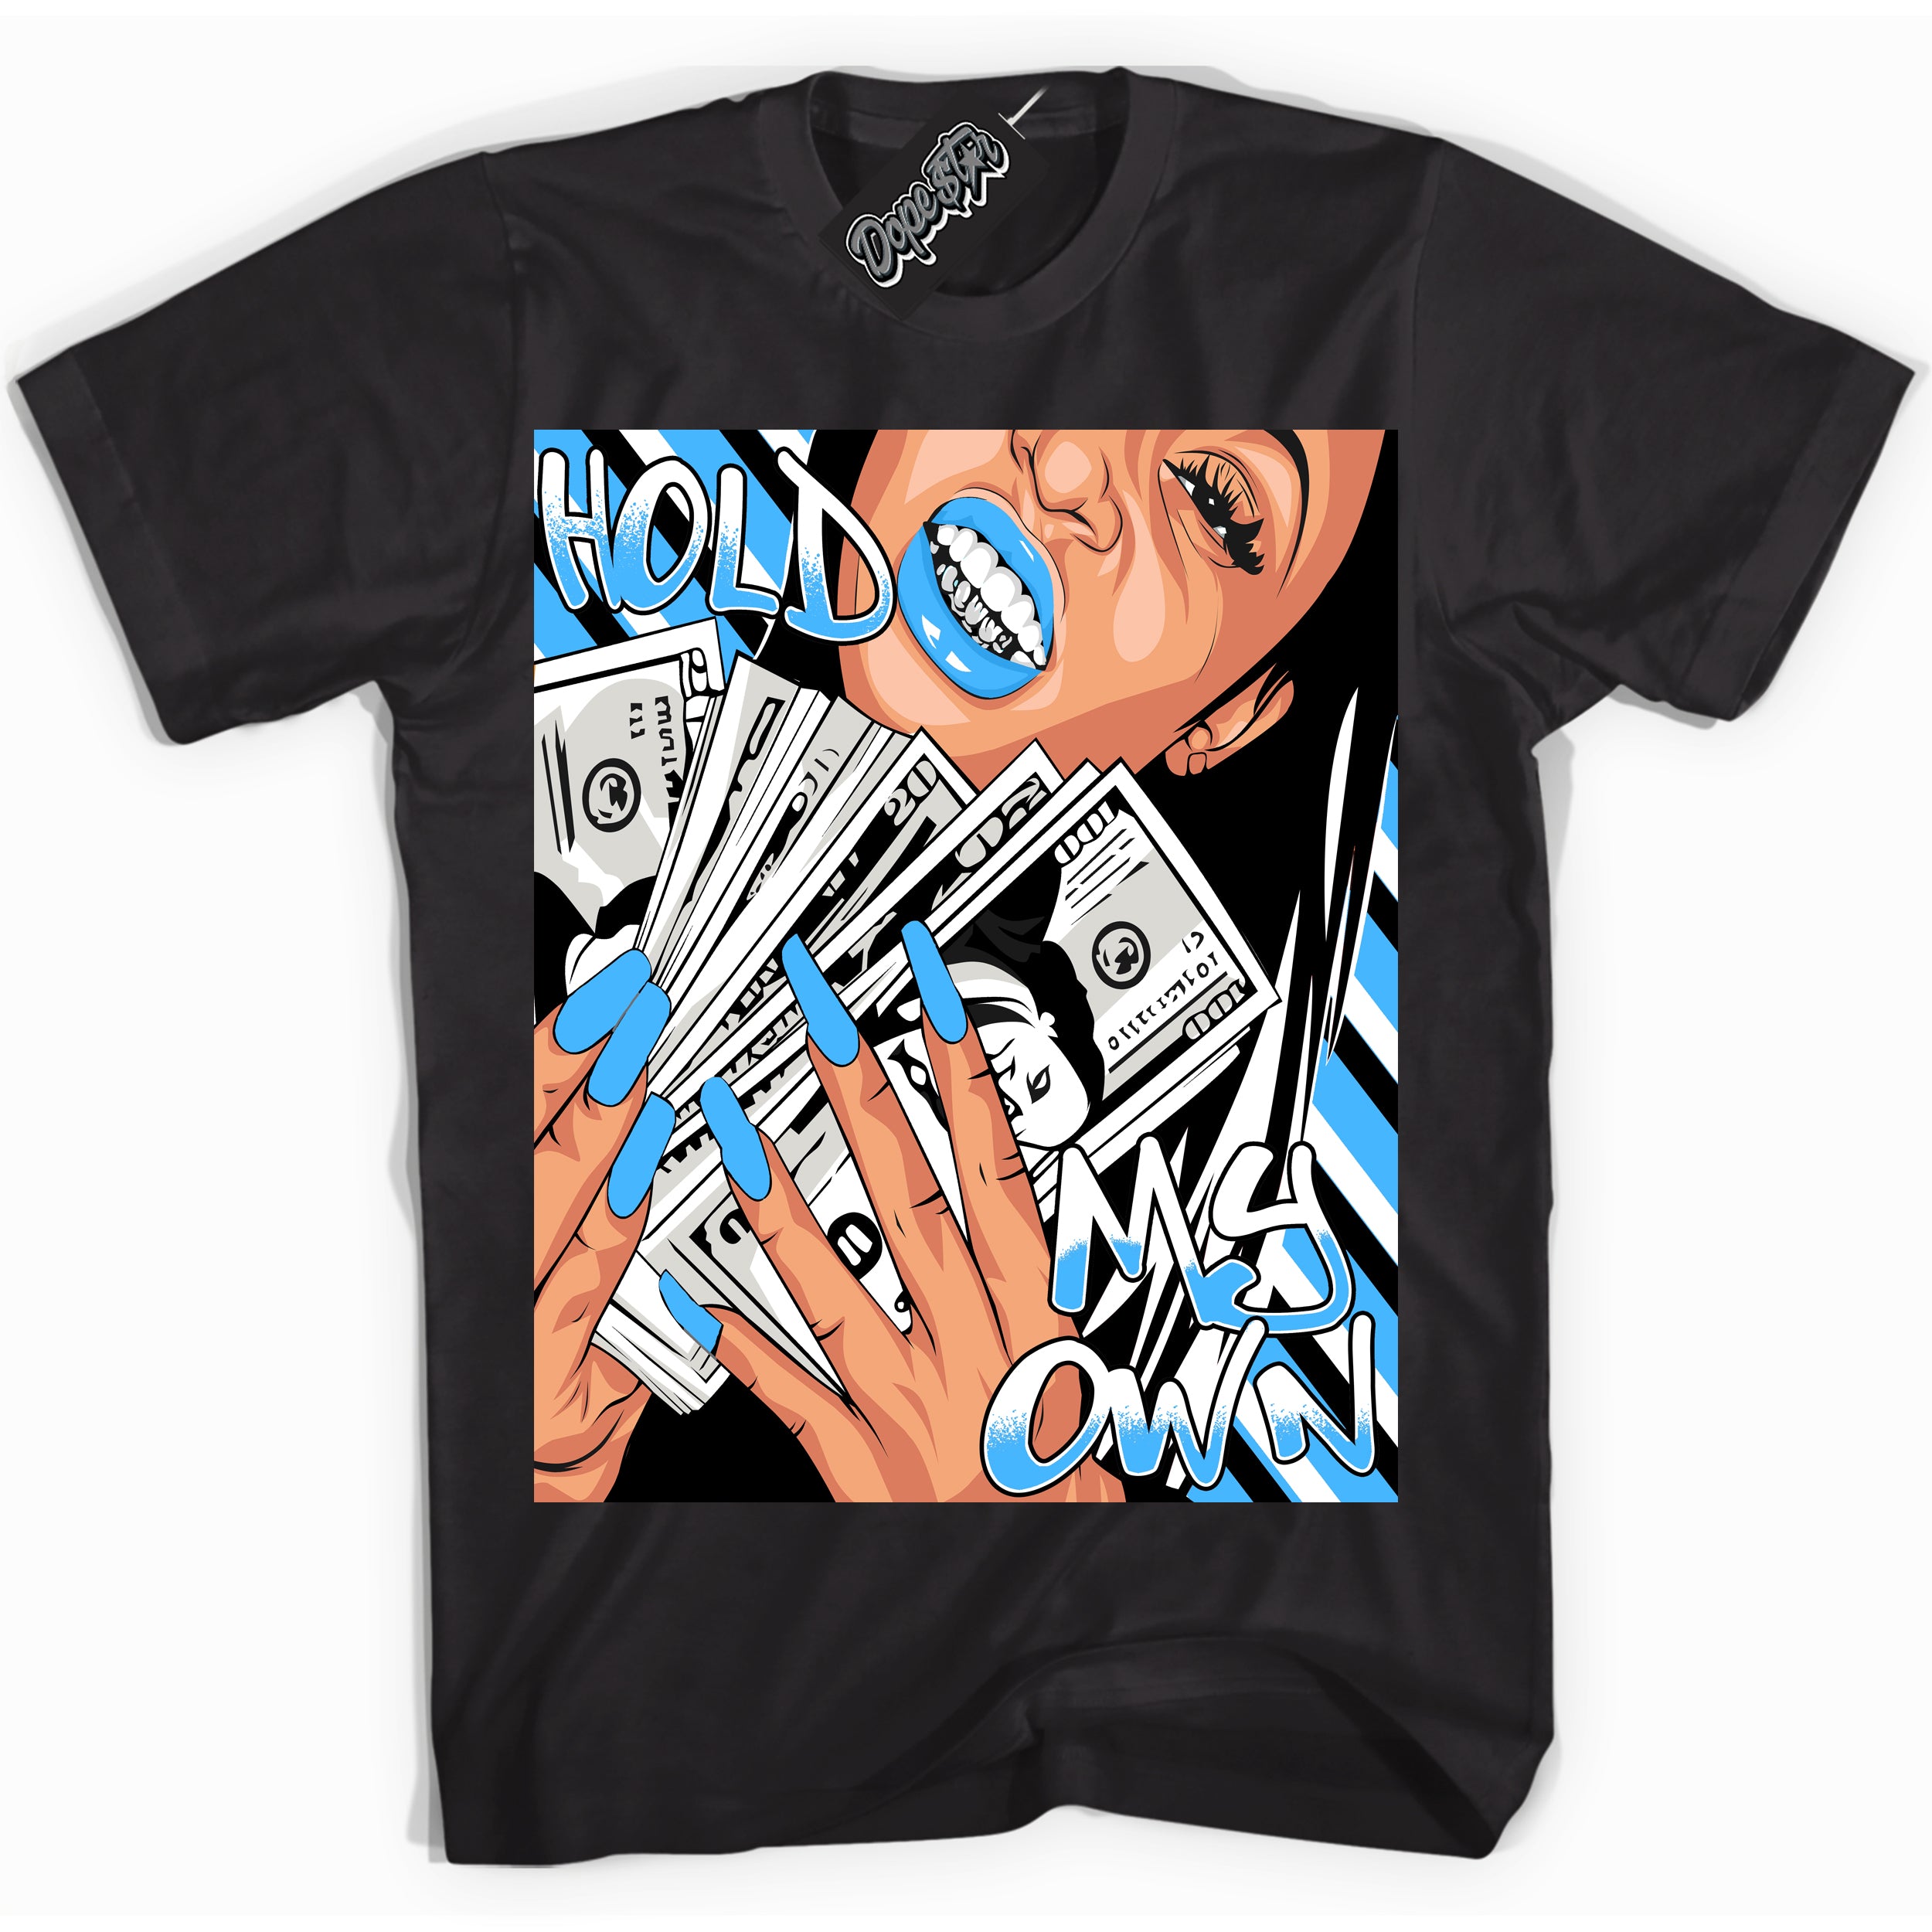 Cool Black graphic tee with “ Hold My Own ” design, that perfectly matches Powder Blue 9s sneakers 